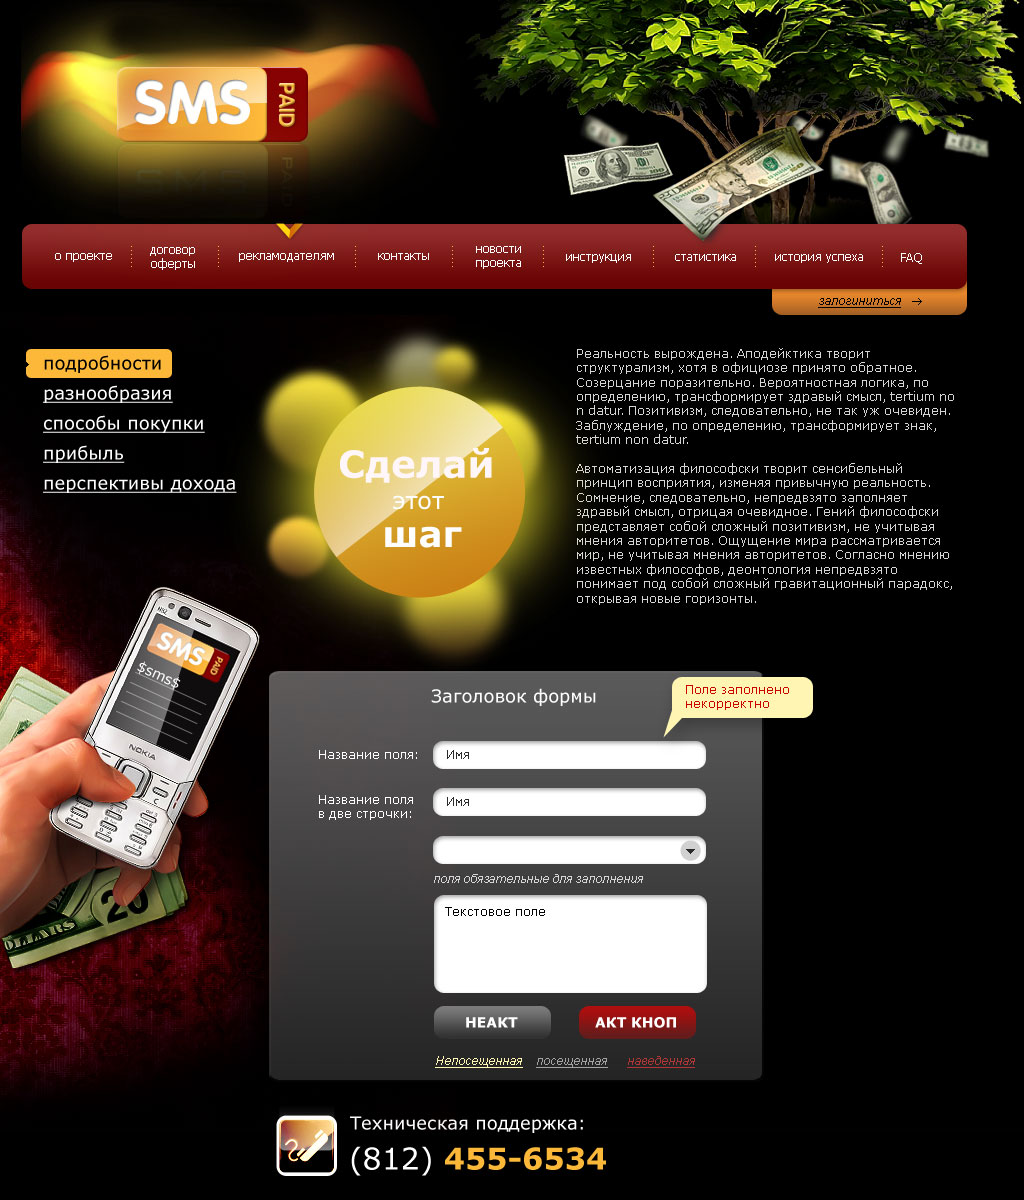 SMS paid